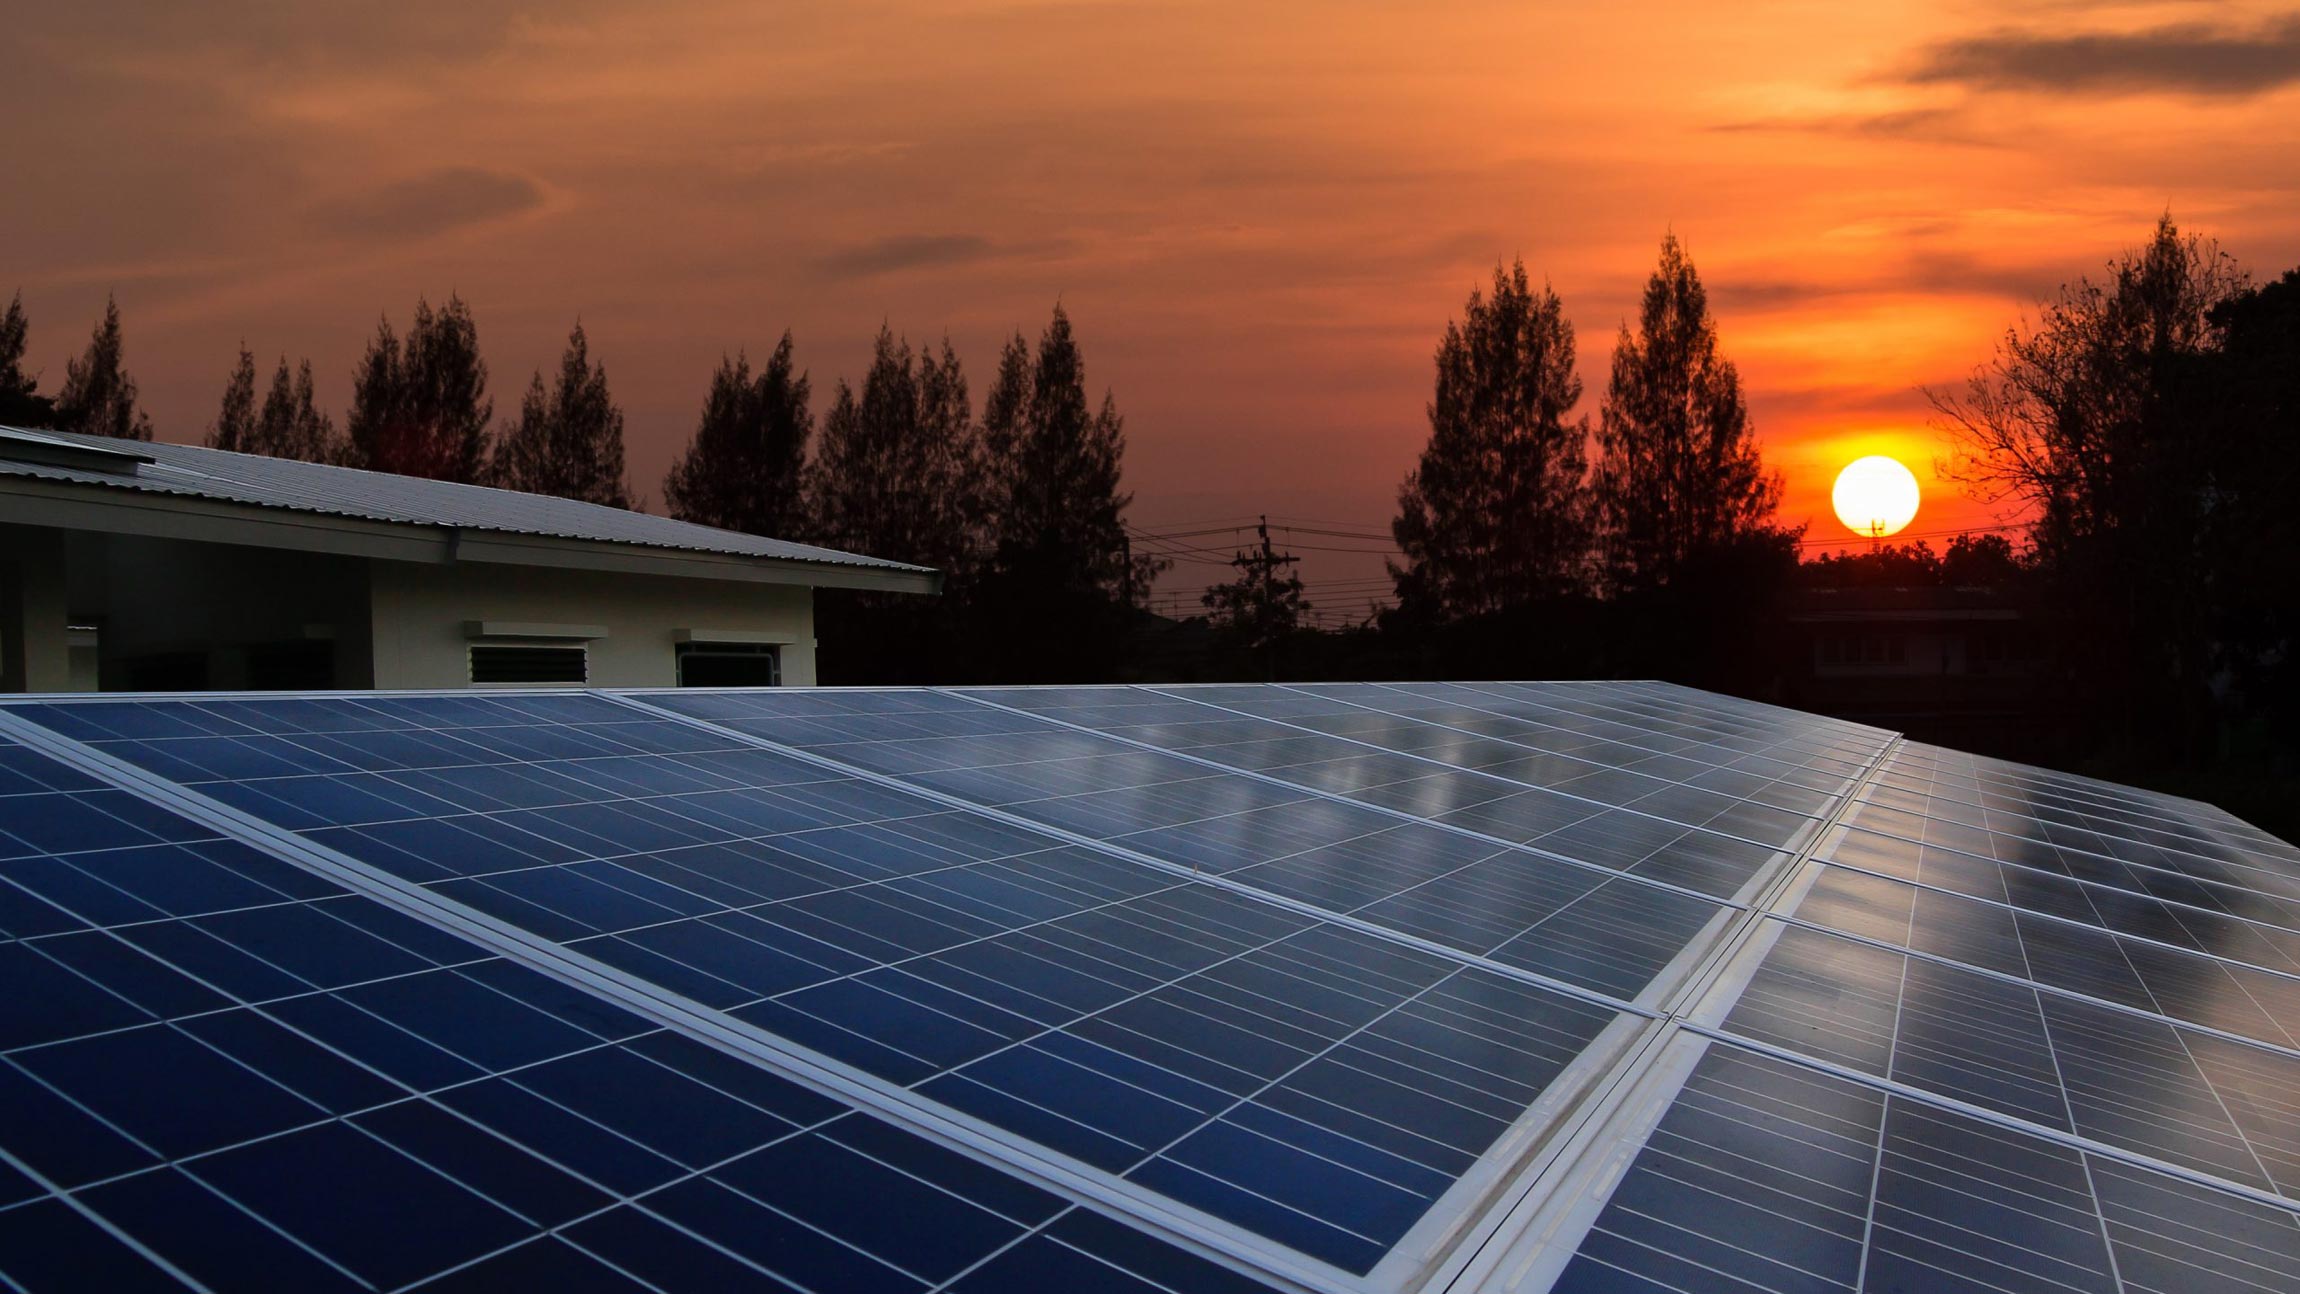 Armstrong, leveraging its partnership with Beringea, acquires portfolio of commercial rooftop solar assets developed by Eden Sustainable